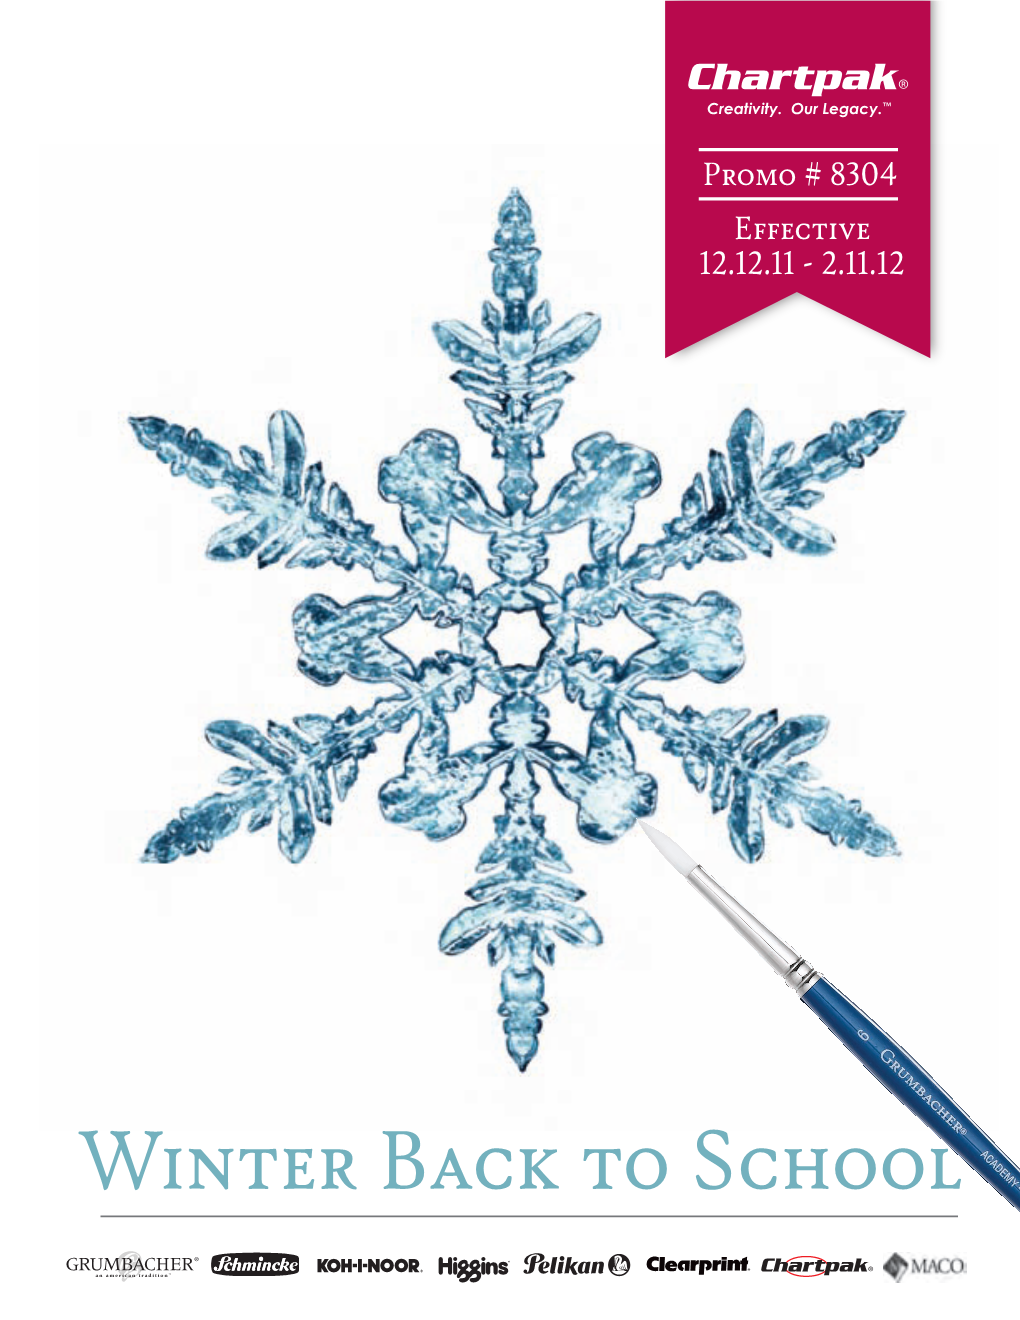 Winter Back to School Promotion Terms